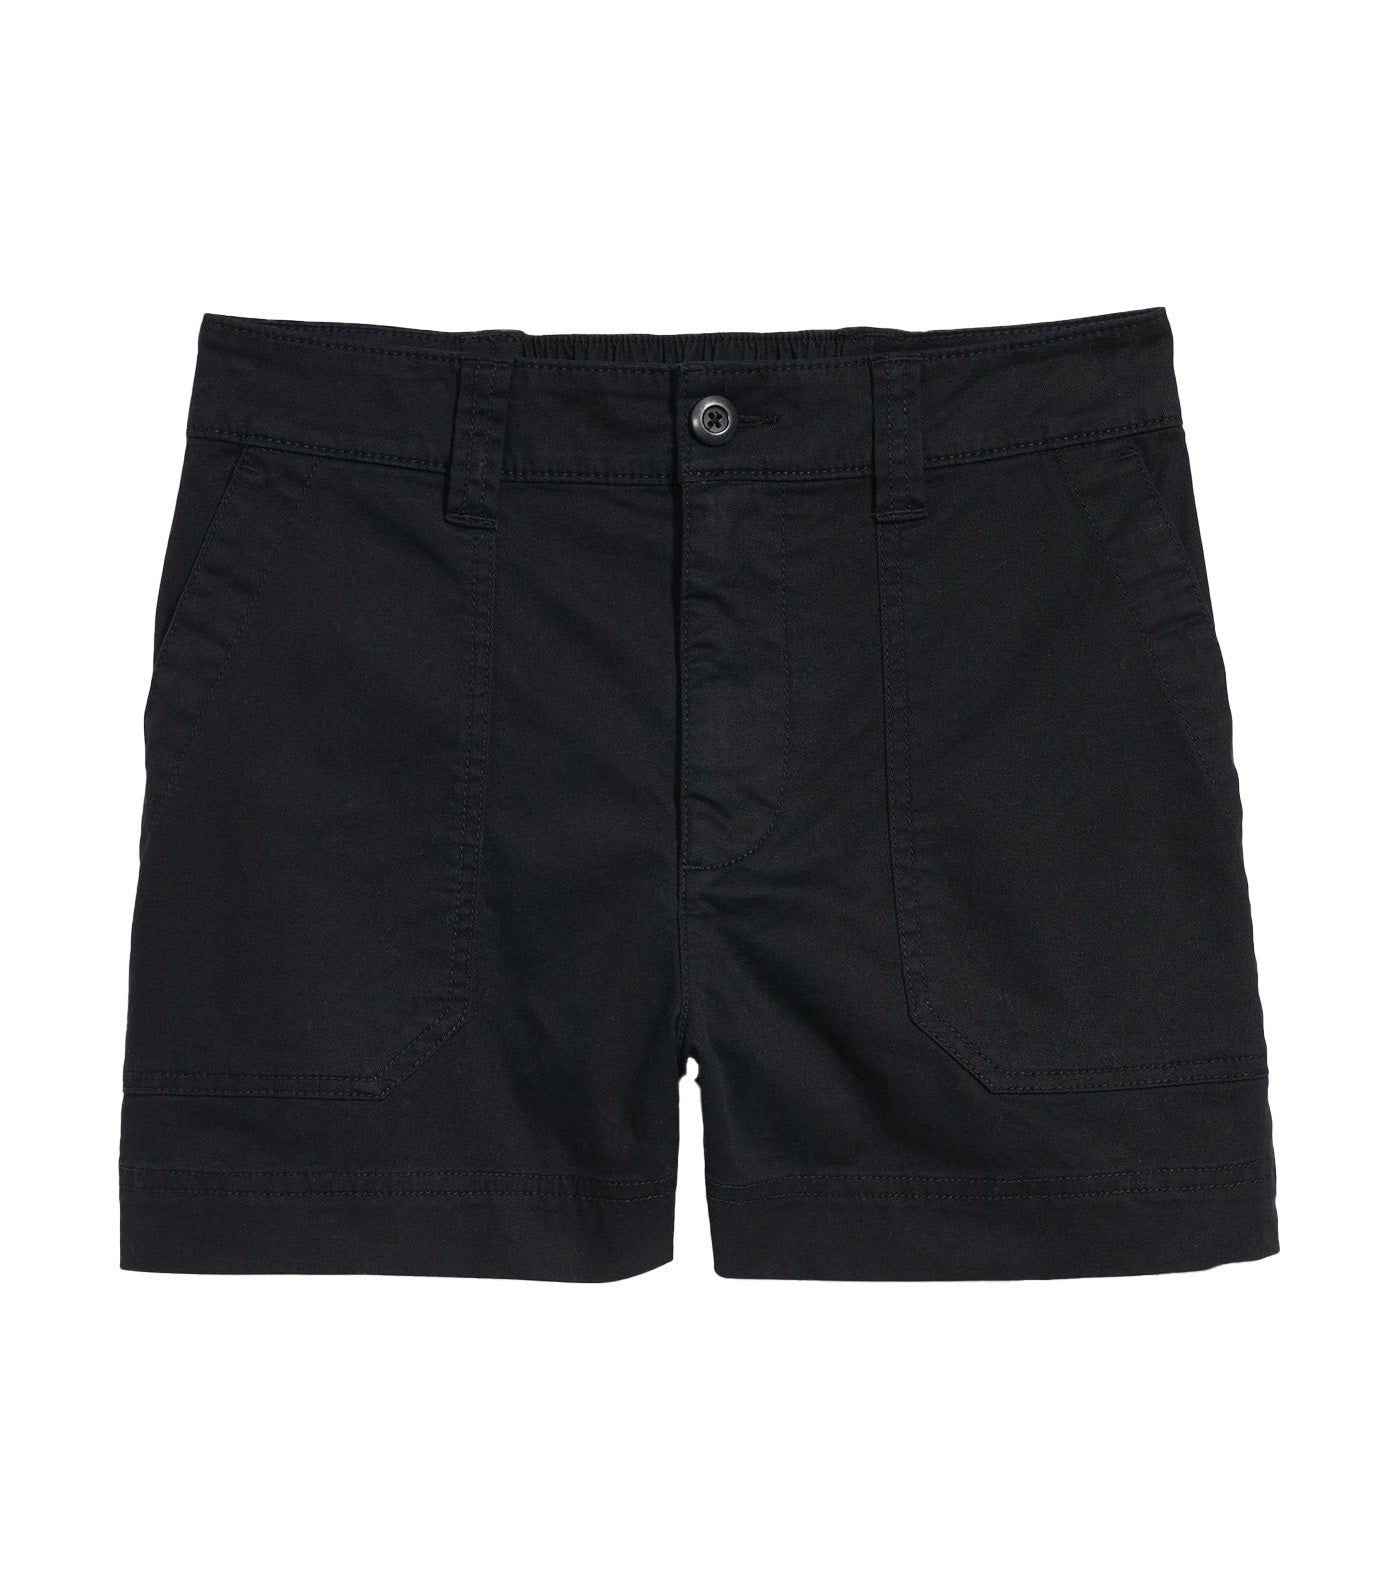 High-Waisted OGC Utility Chino Shorts for Women 3.5-inch inseam Black Jack